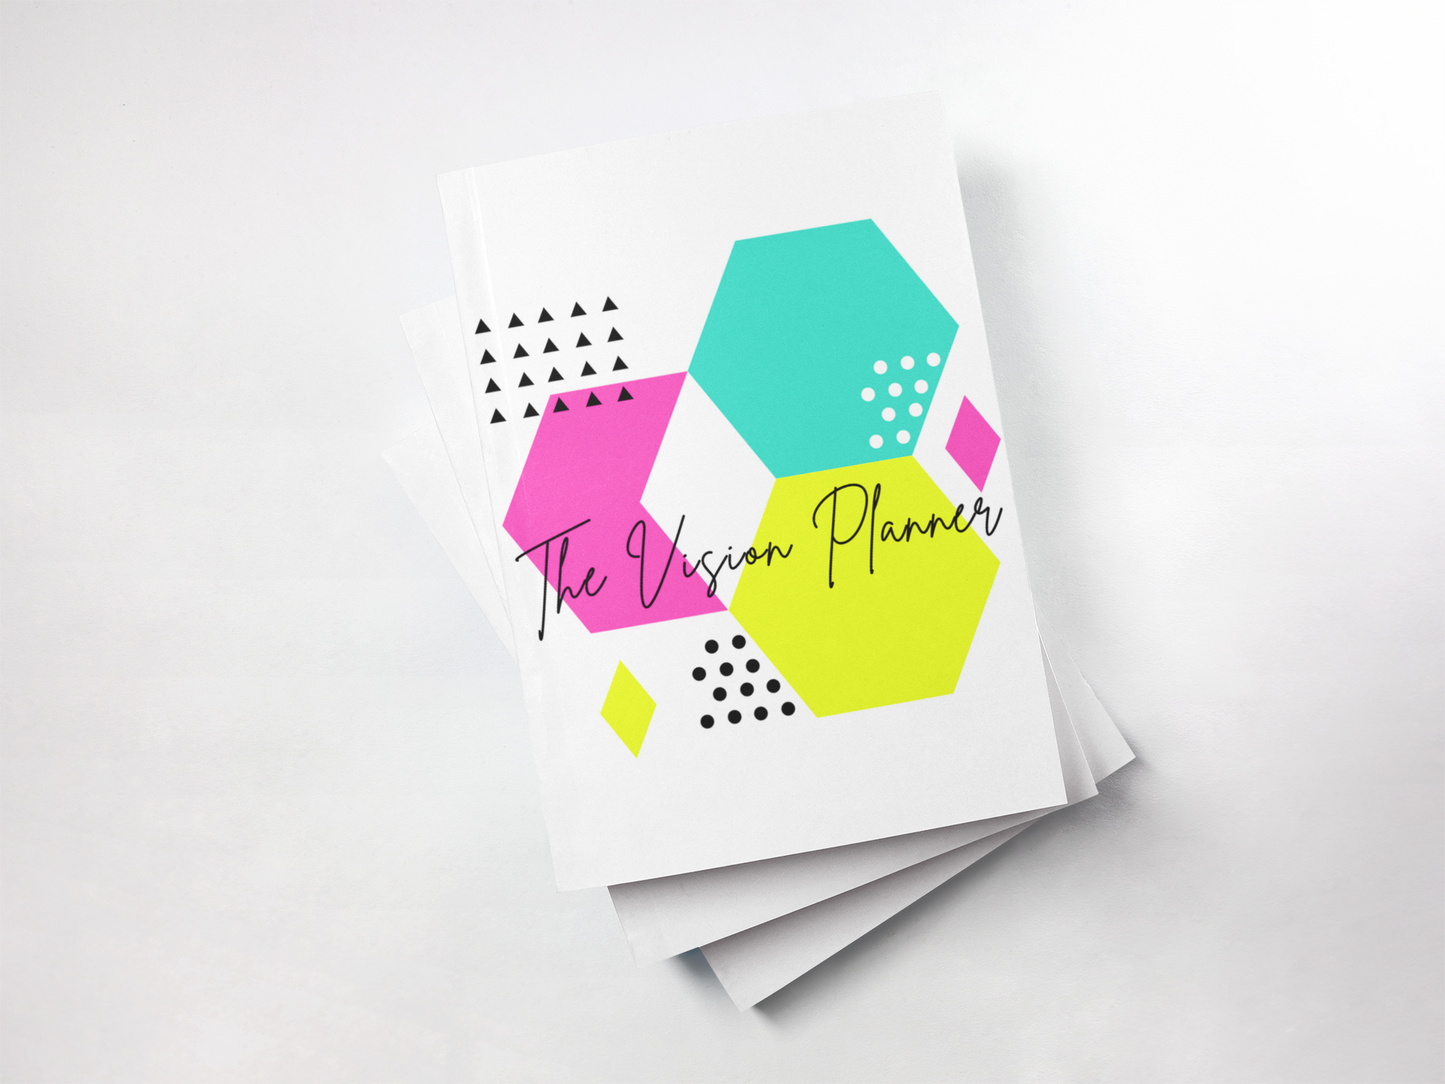 The Vision Planner: Daily Goal and Vision Planner